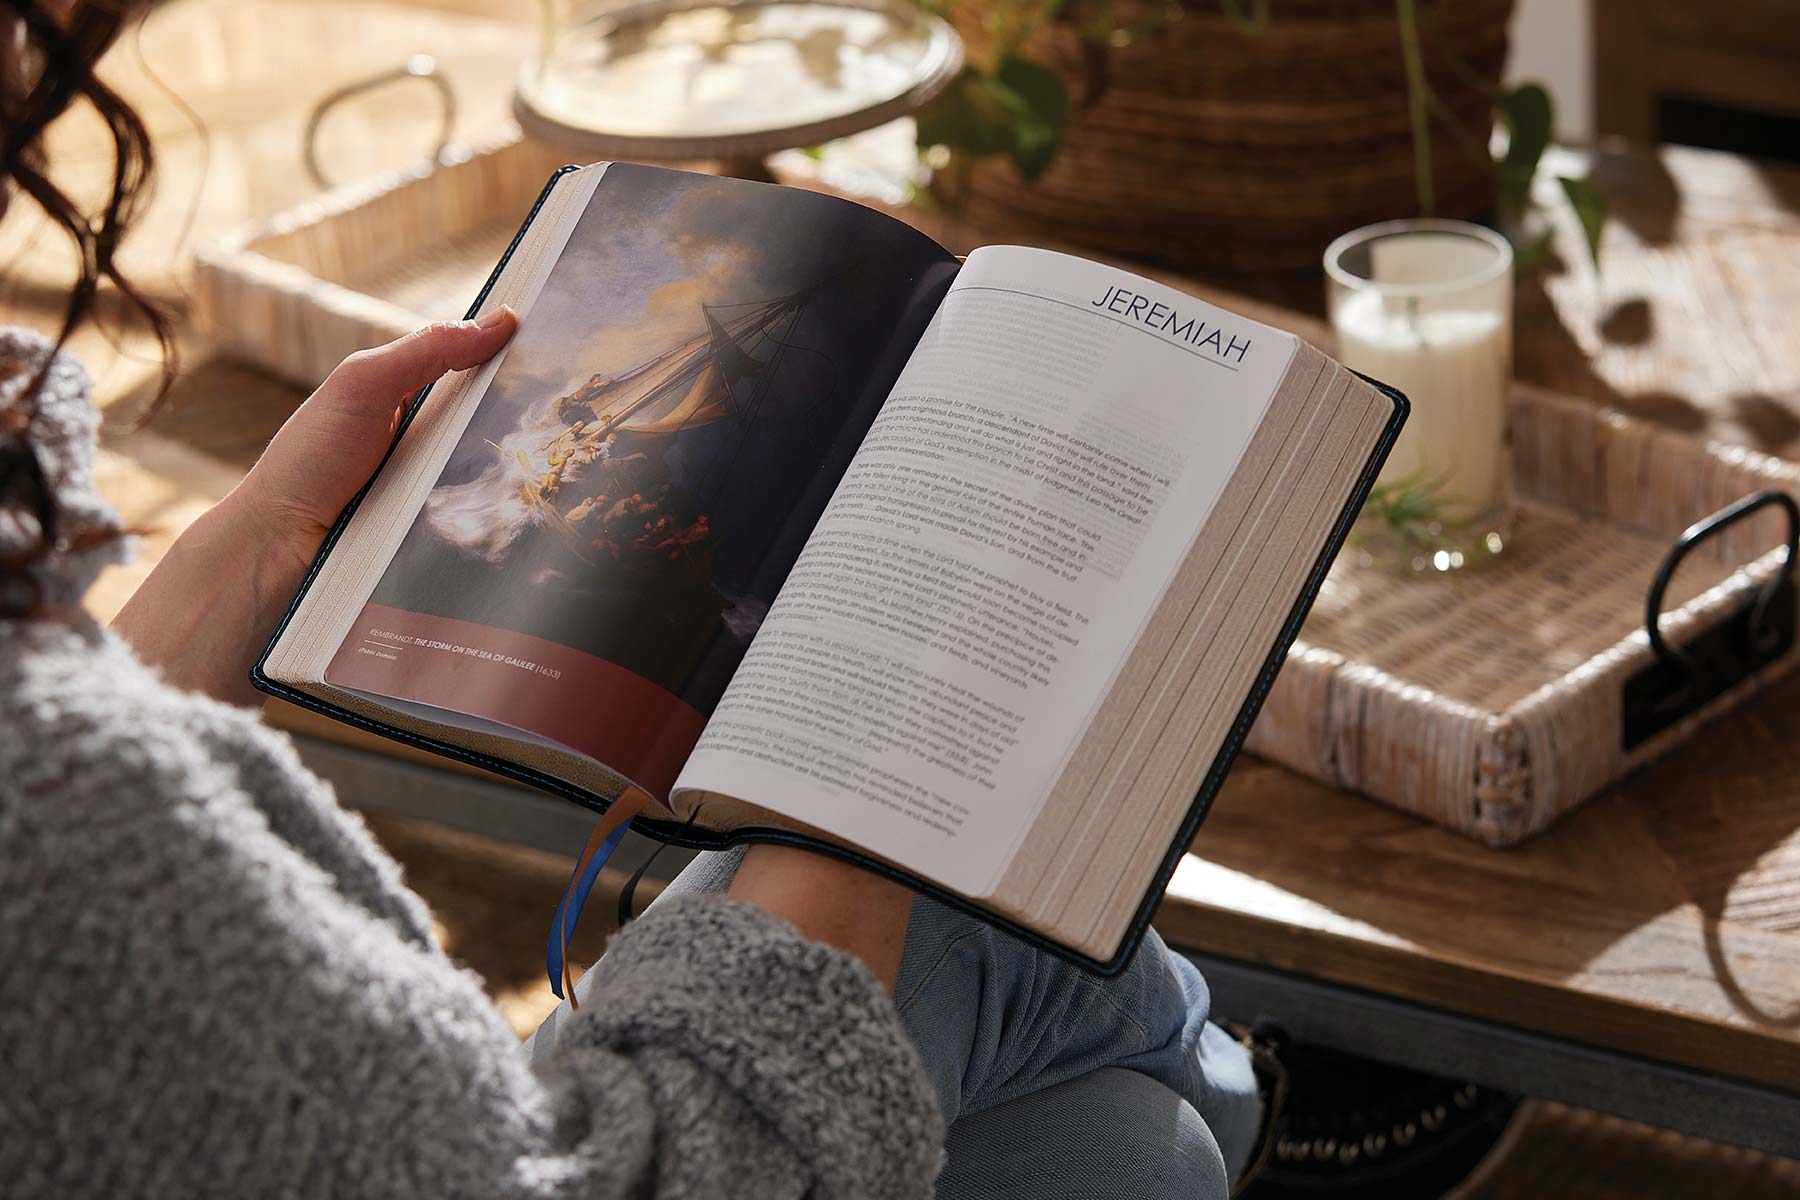 The Timeless Truths Bible, featuring devotional length commentary for every chapter of the Bible, art inspired by Scripture, and selected text from the creeds and confessions of the Christian faith.